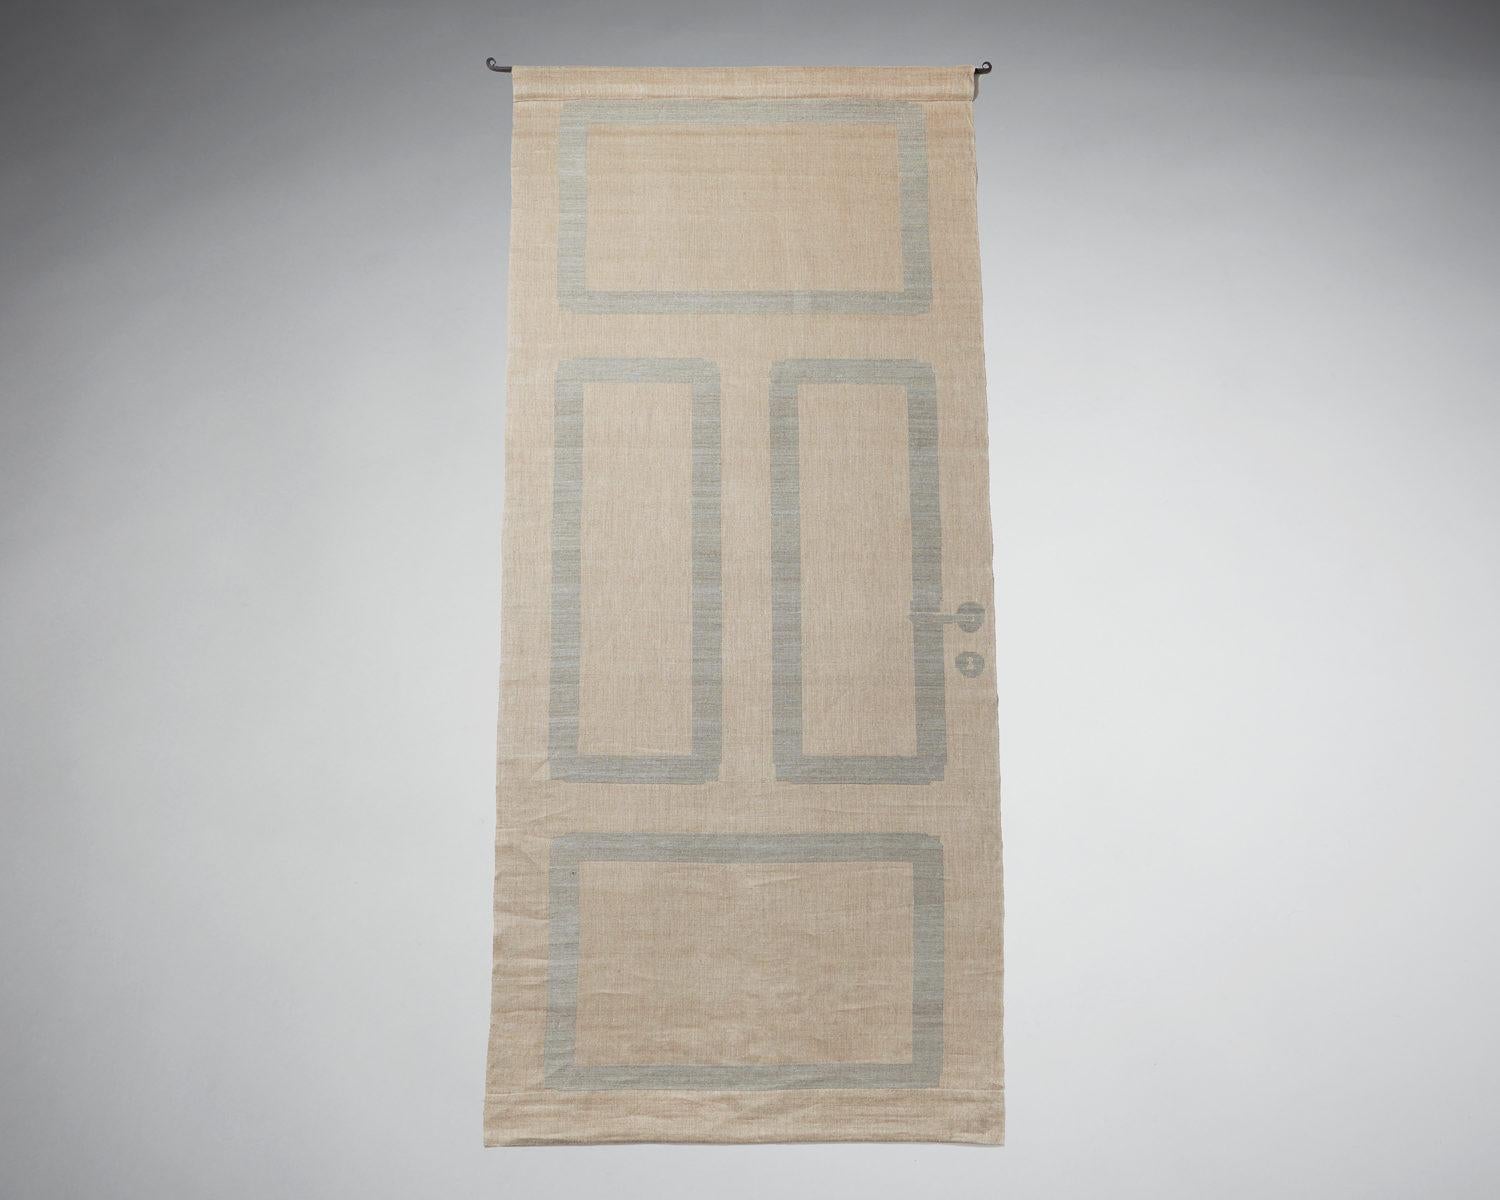 Tapestry, designed by Elisabet Hasselberg Olsson Sweden, 1970s

Tapestry technique. Pure linen.

Hand woven.

Measurements: 
H 180 cm/ 5' 11 1/2